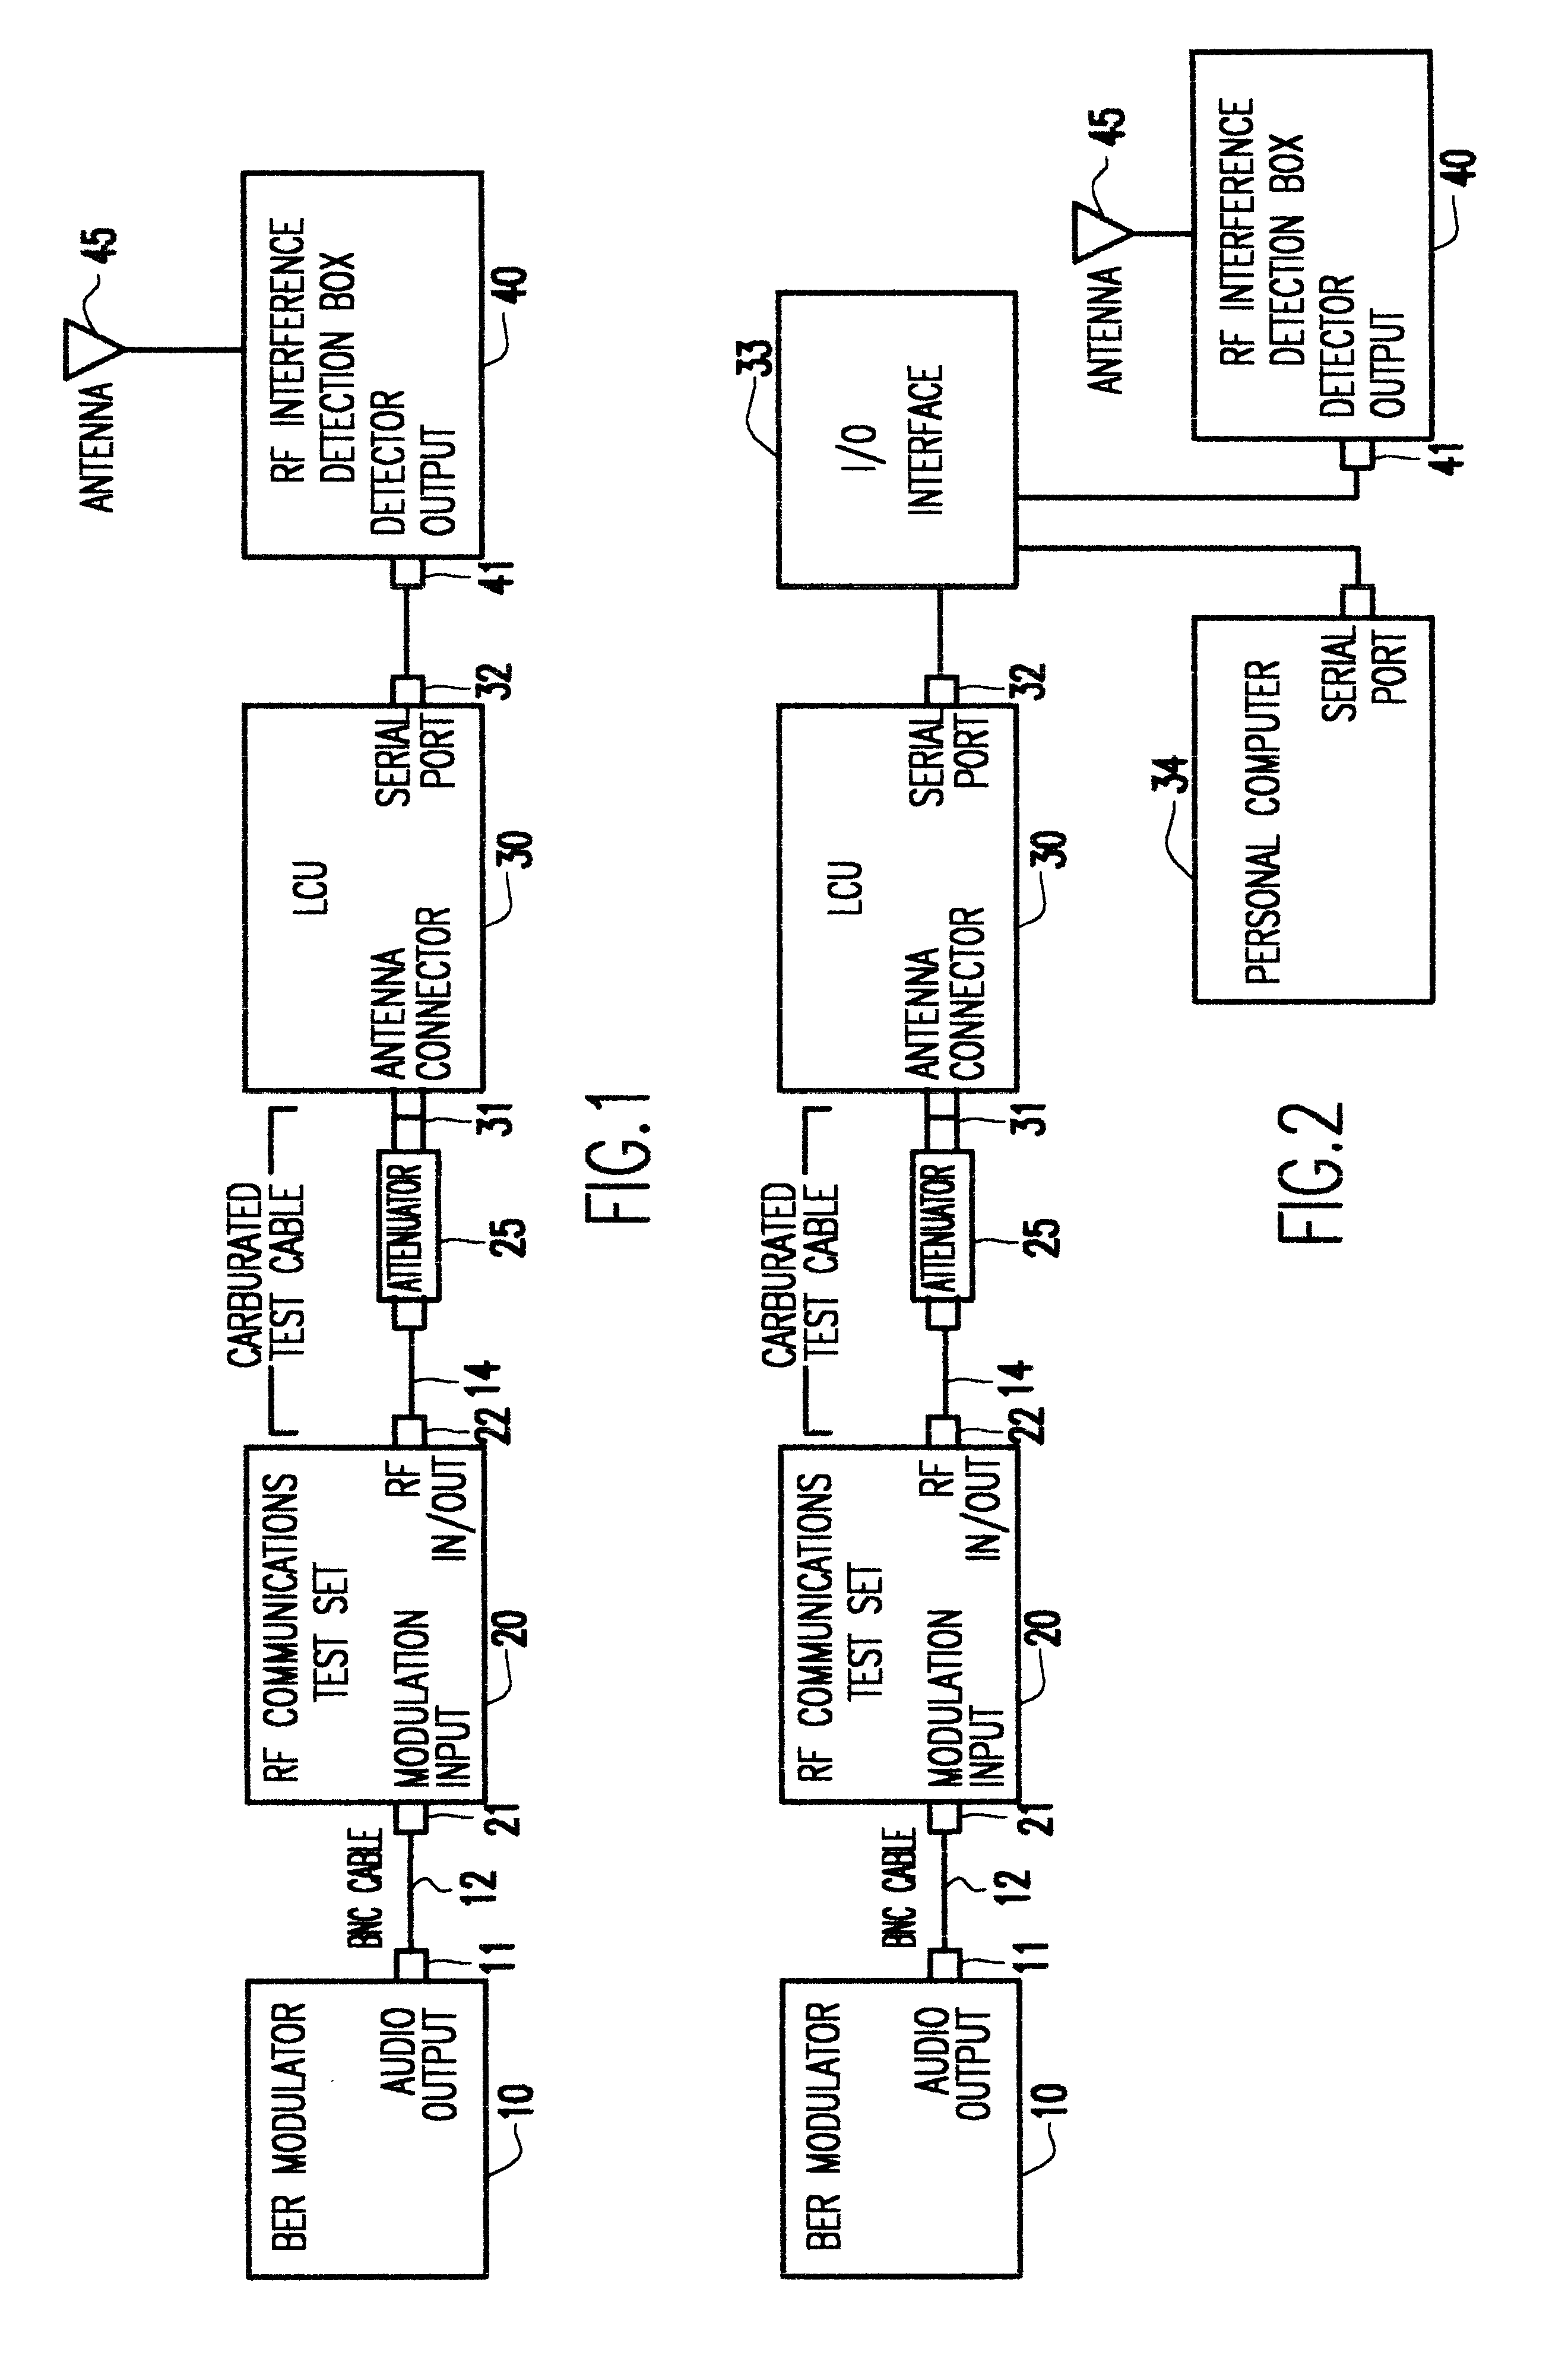 Radio interference detection and screening system for locomotive control unit radios